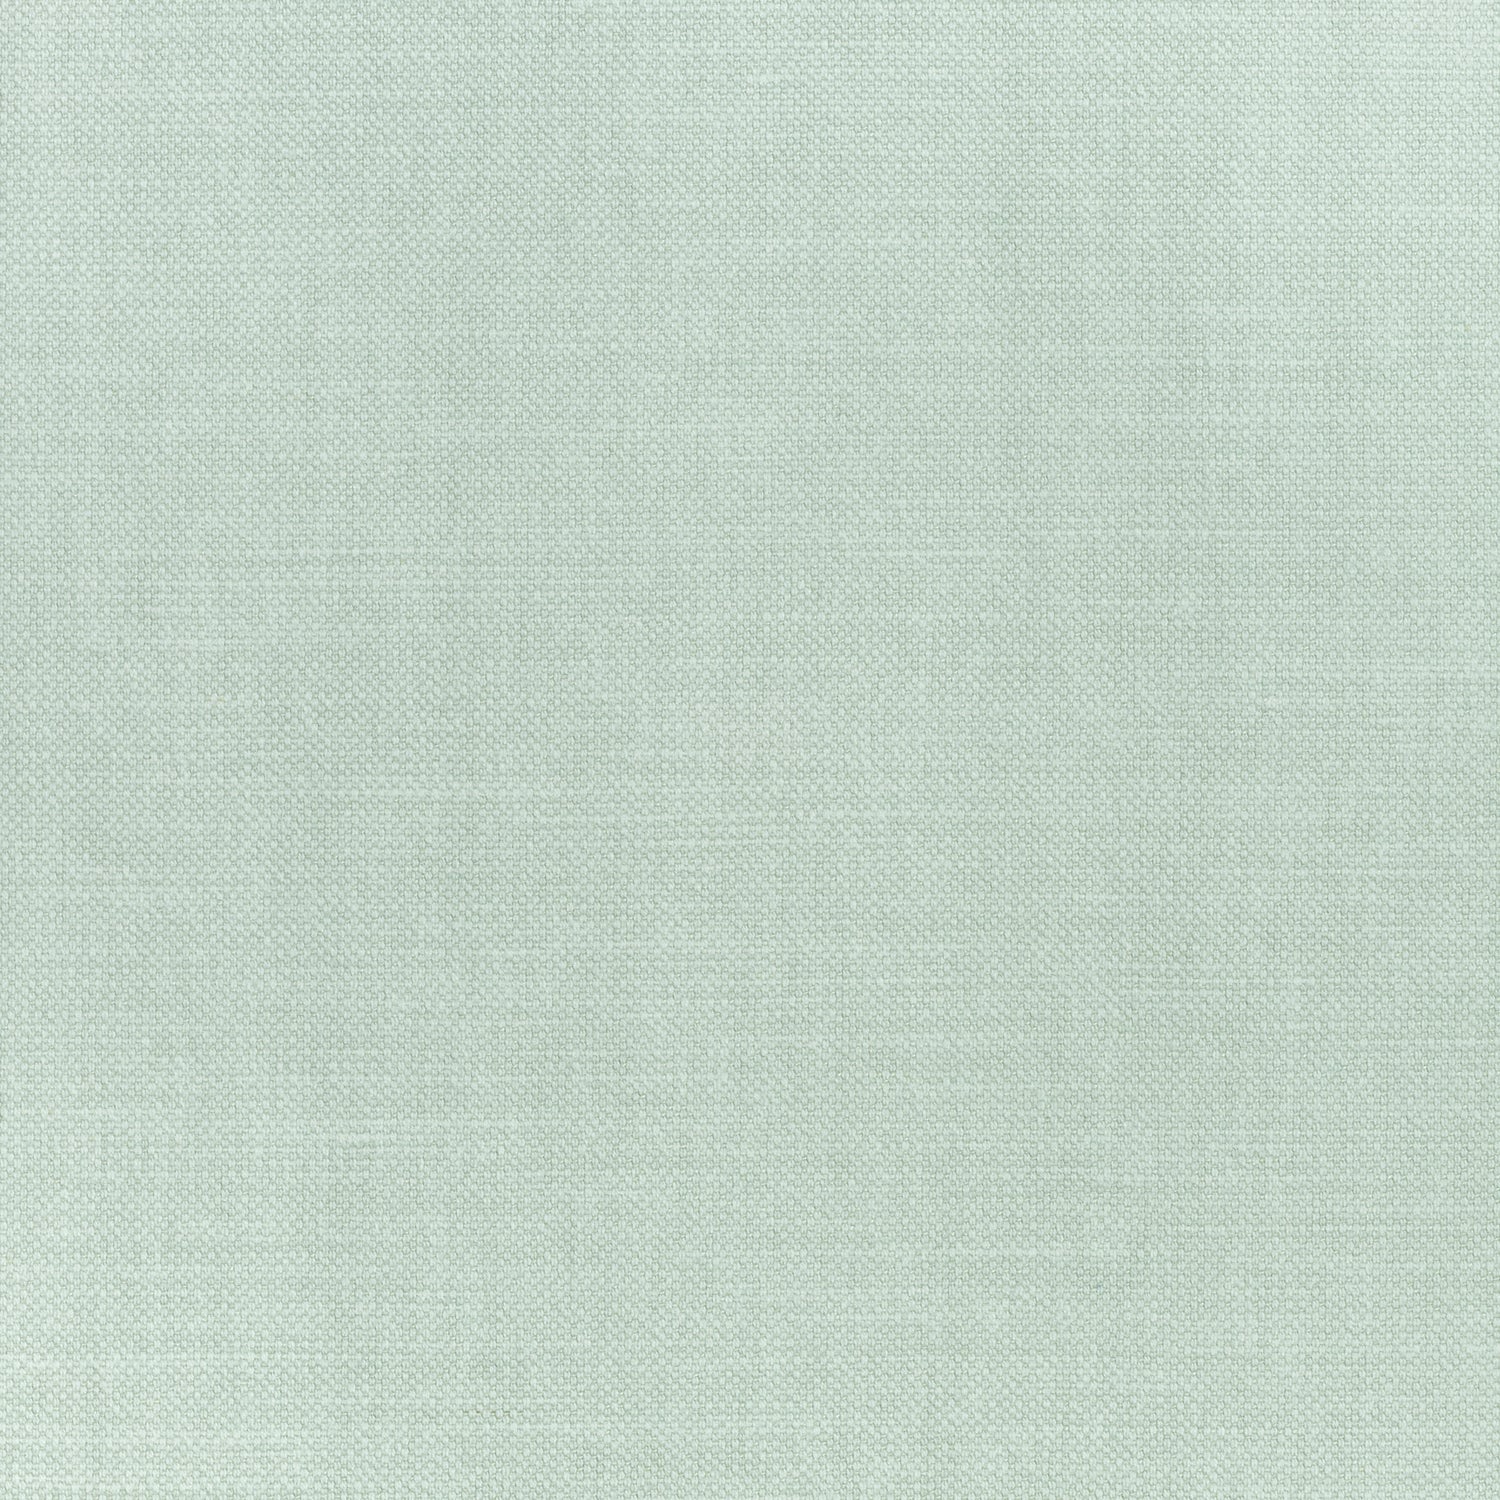 Prisma fabric in mist color - pattern number W70149 - by Thibaut in the Woven Resource Vol 12 Prisma Fabrics collection